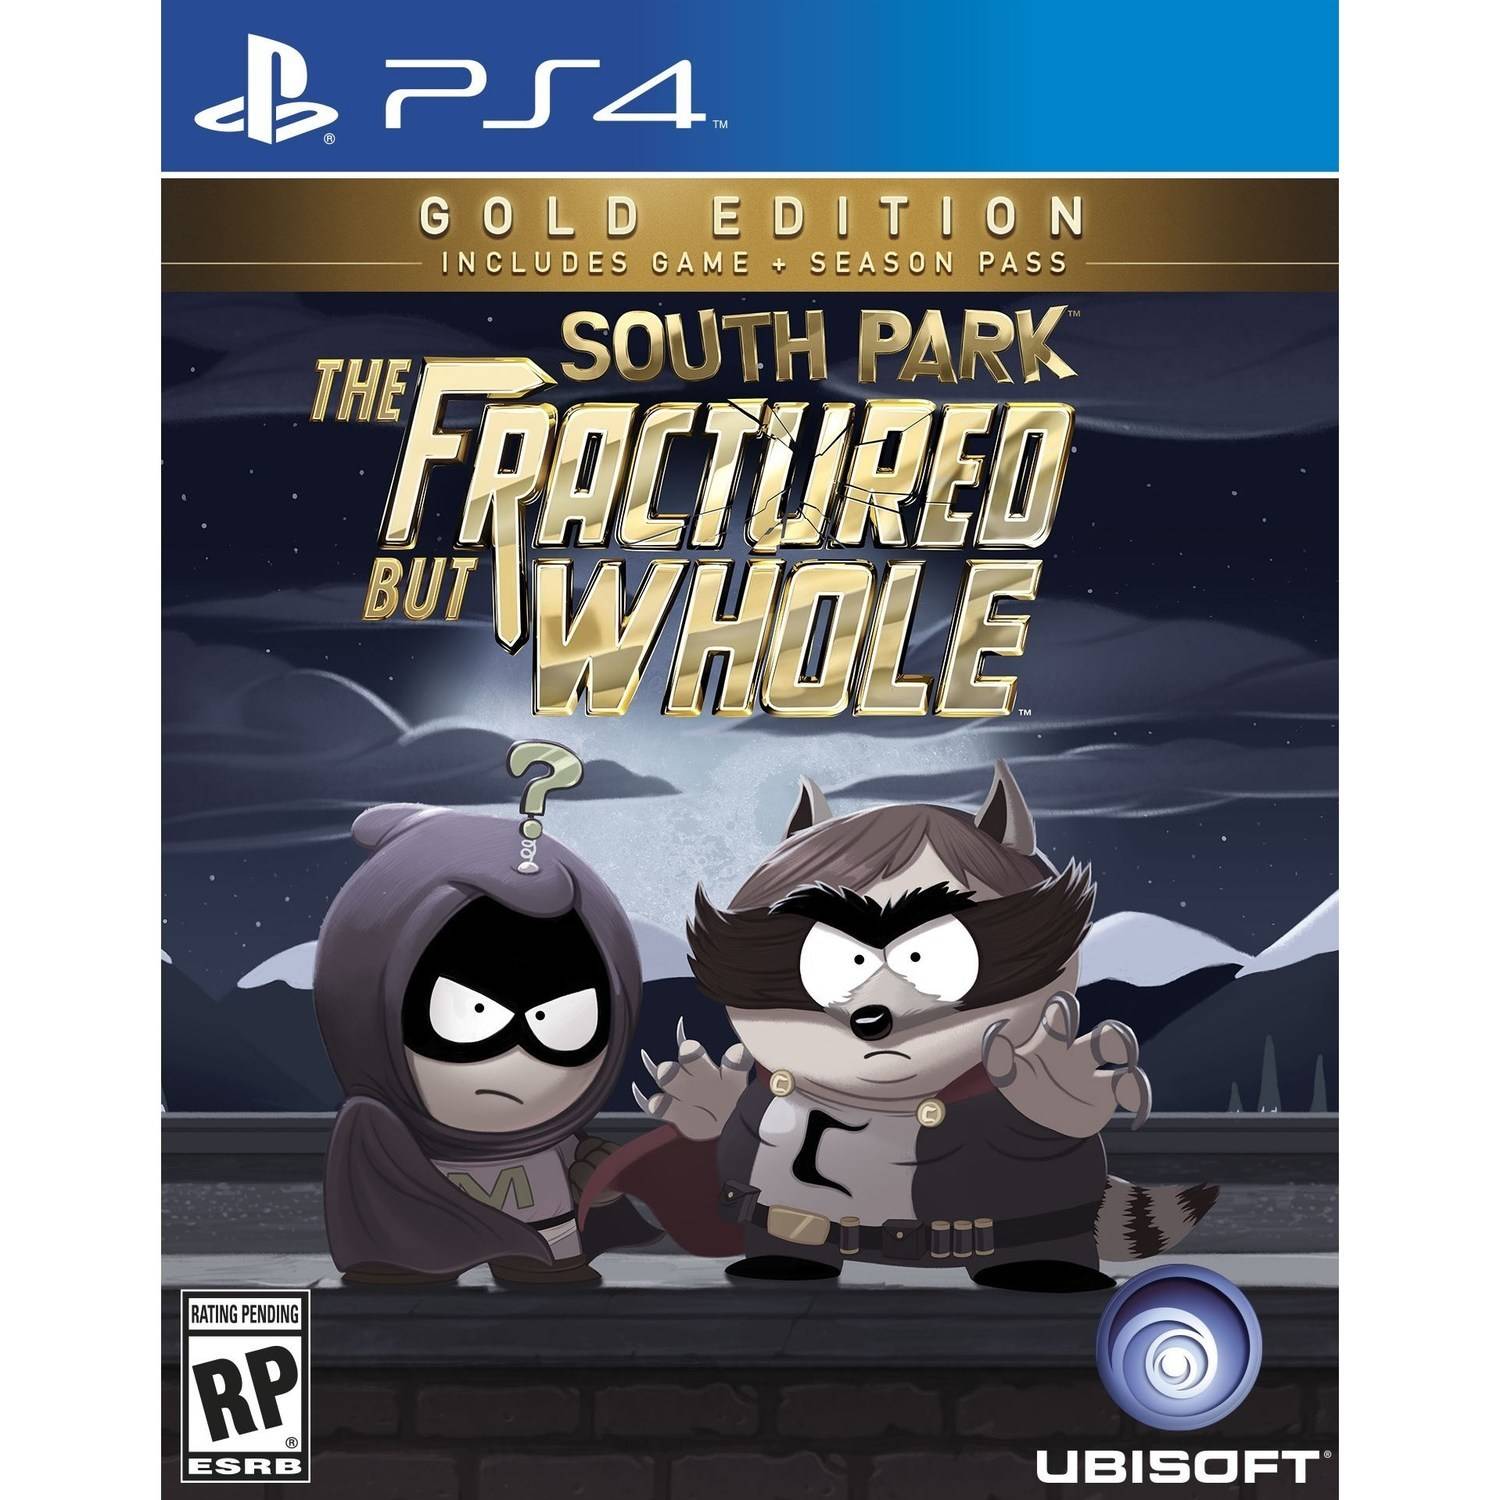 South park the fractured but whole купить ключ steam фото 58